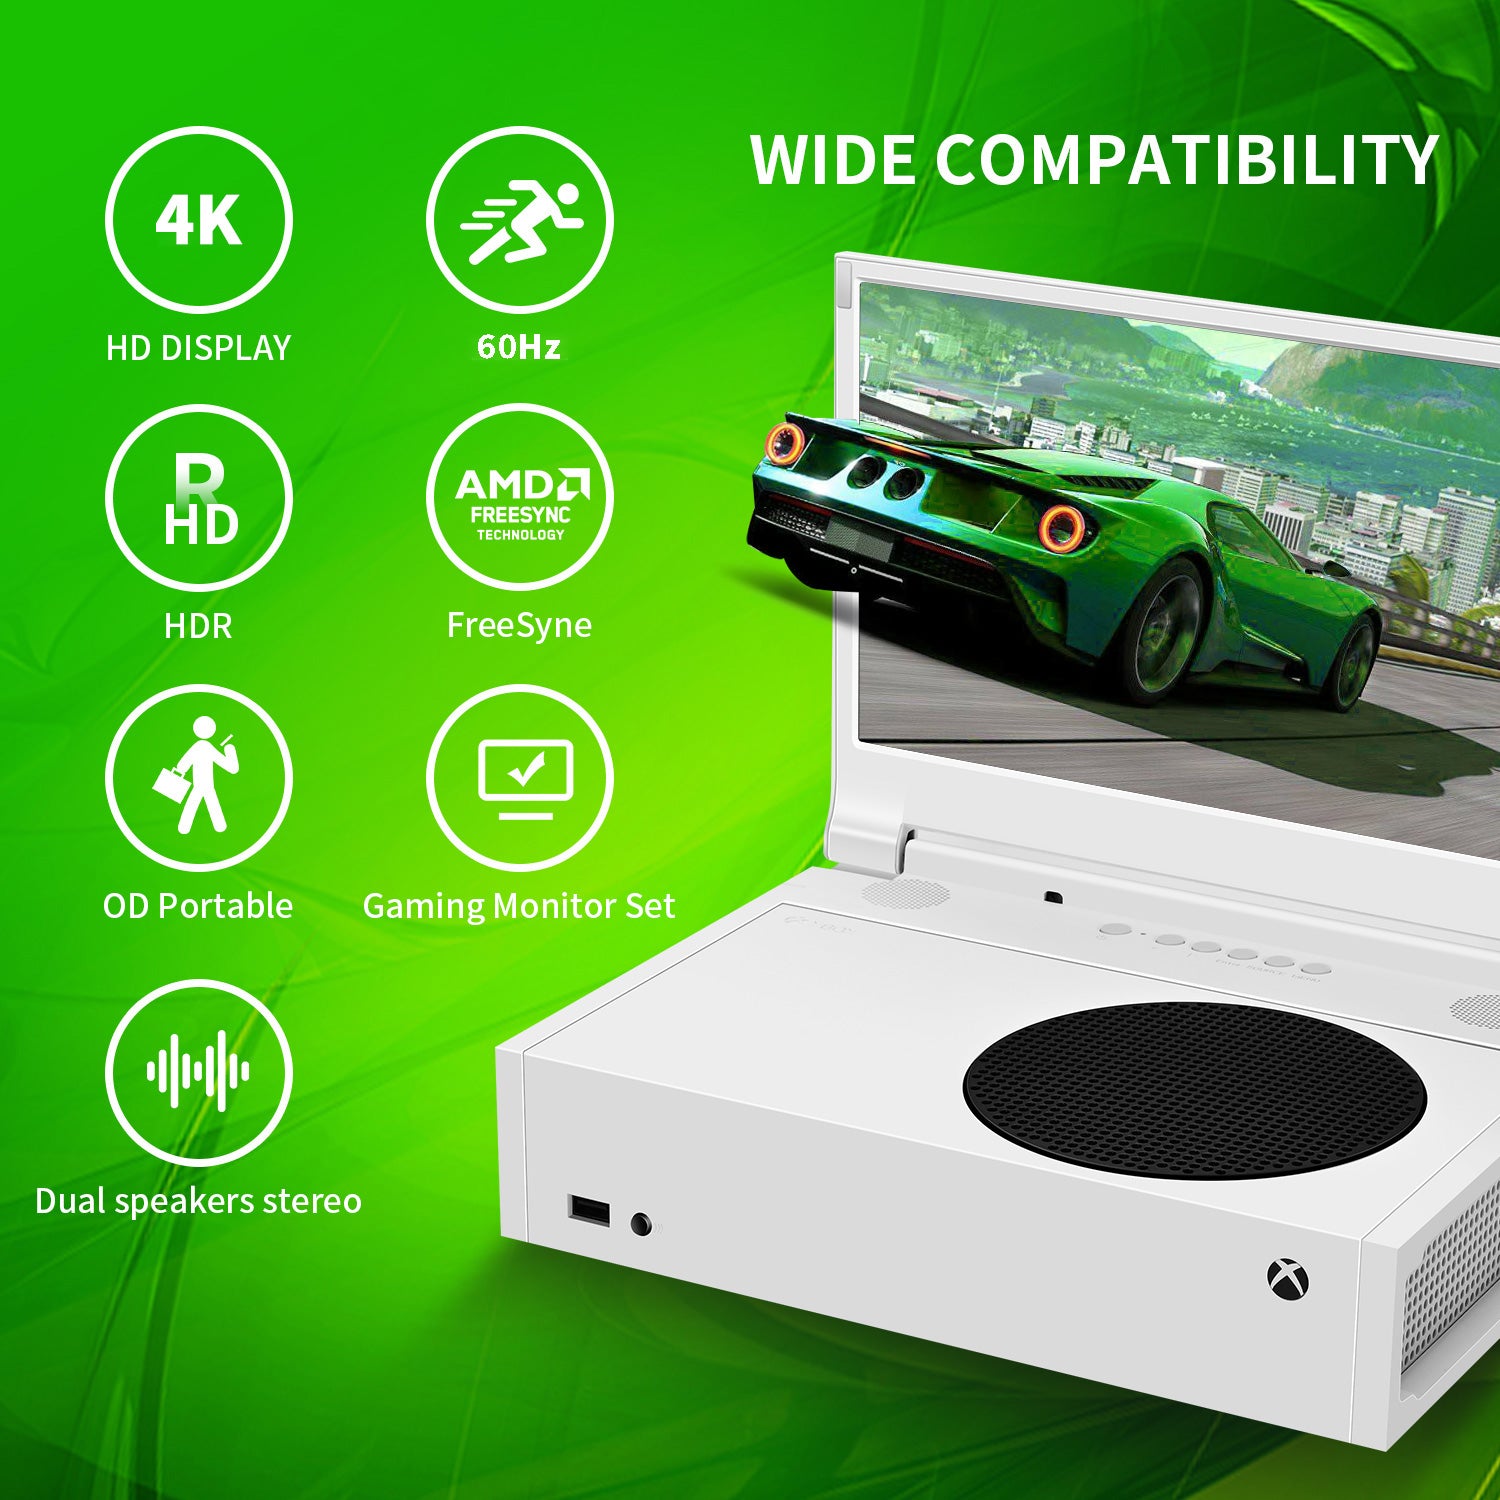 Copy of G-STORY 12.5‘’ Portable Monitor for Xbox Series X, UHD 1080p  Portable Gaming Monitor